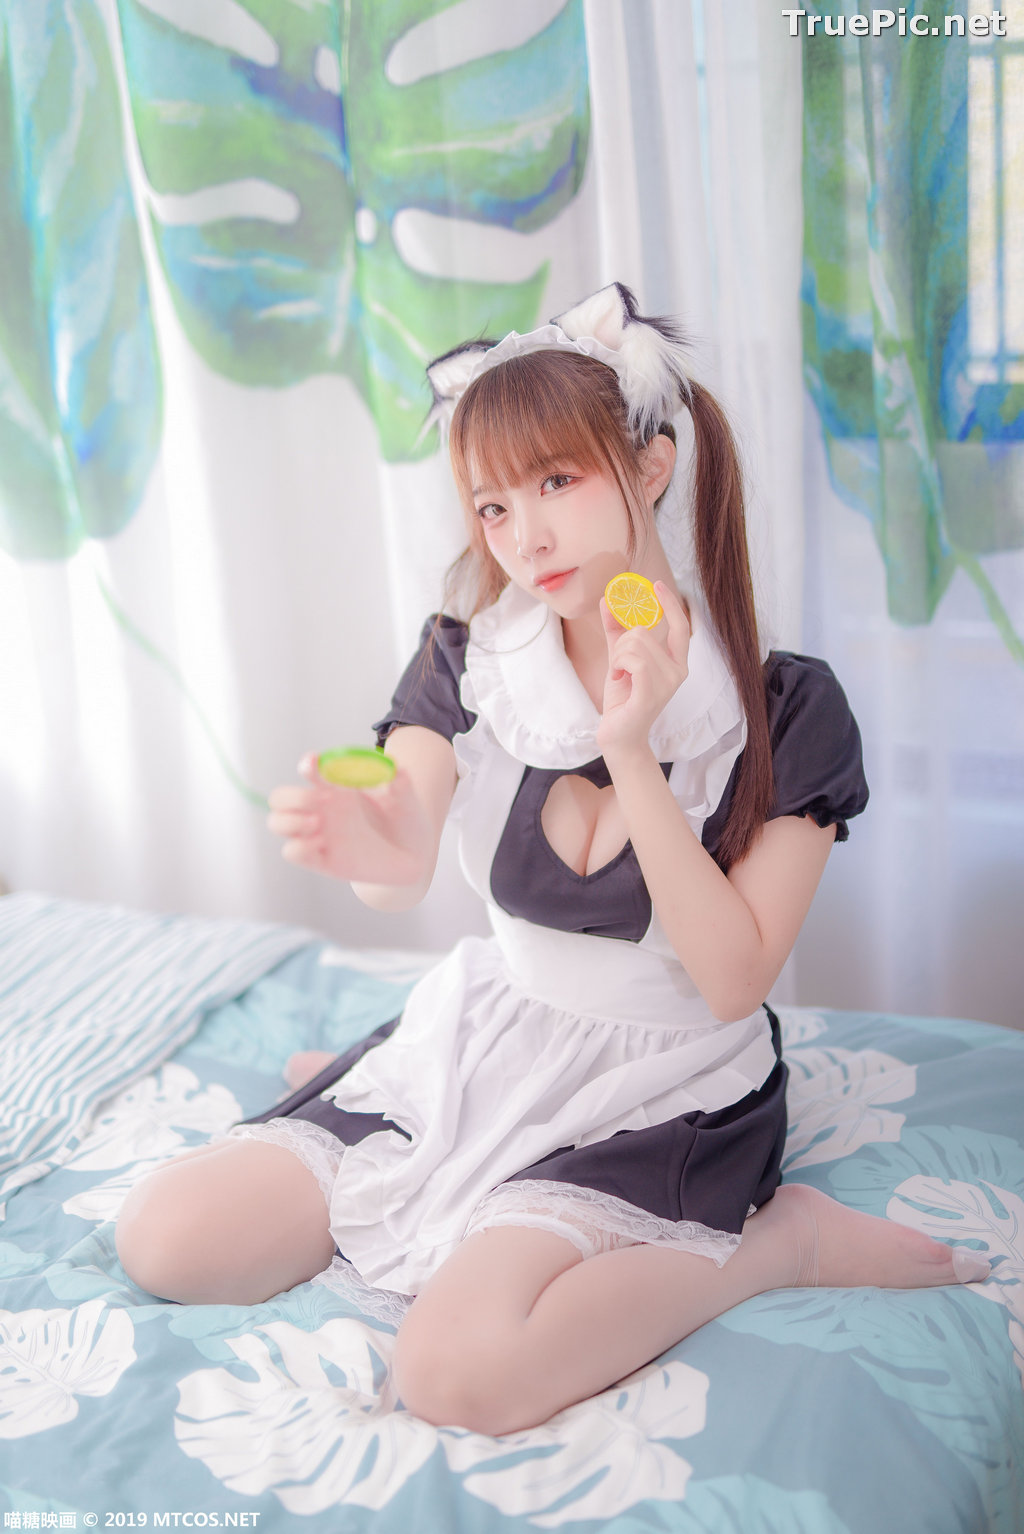 Image [MTCos] 喵糖映画 Vol.049 - Chinese Cute Model - Lovely Maid Cat - TruePic.net - Picture-18